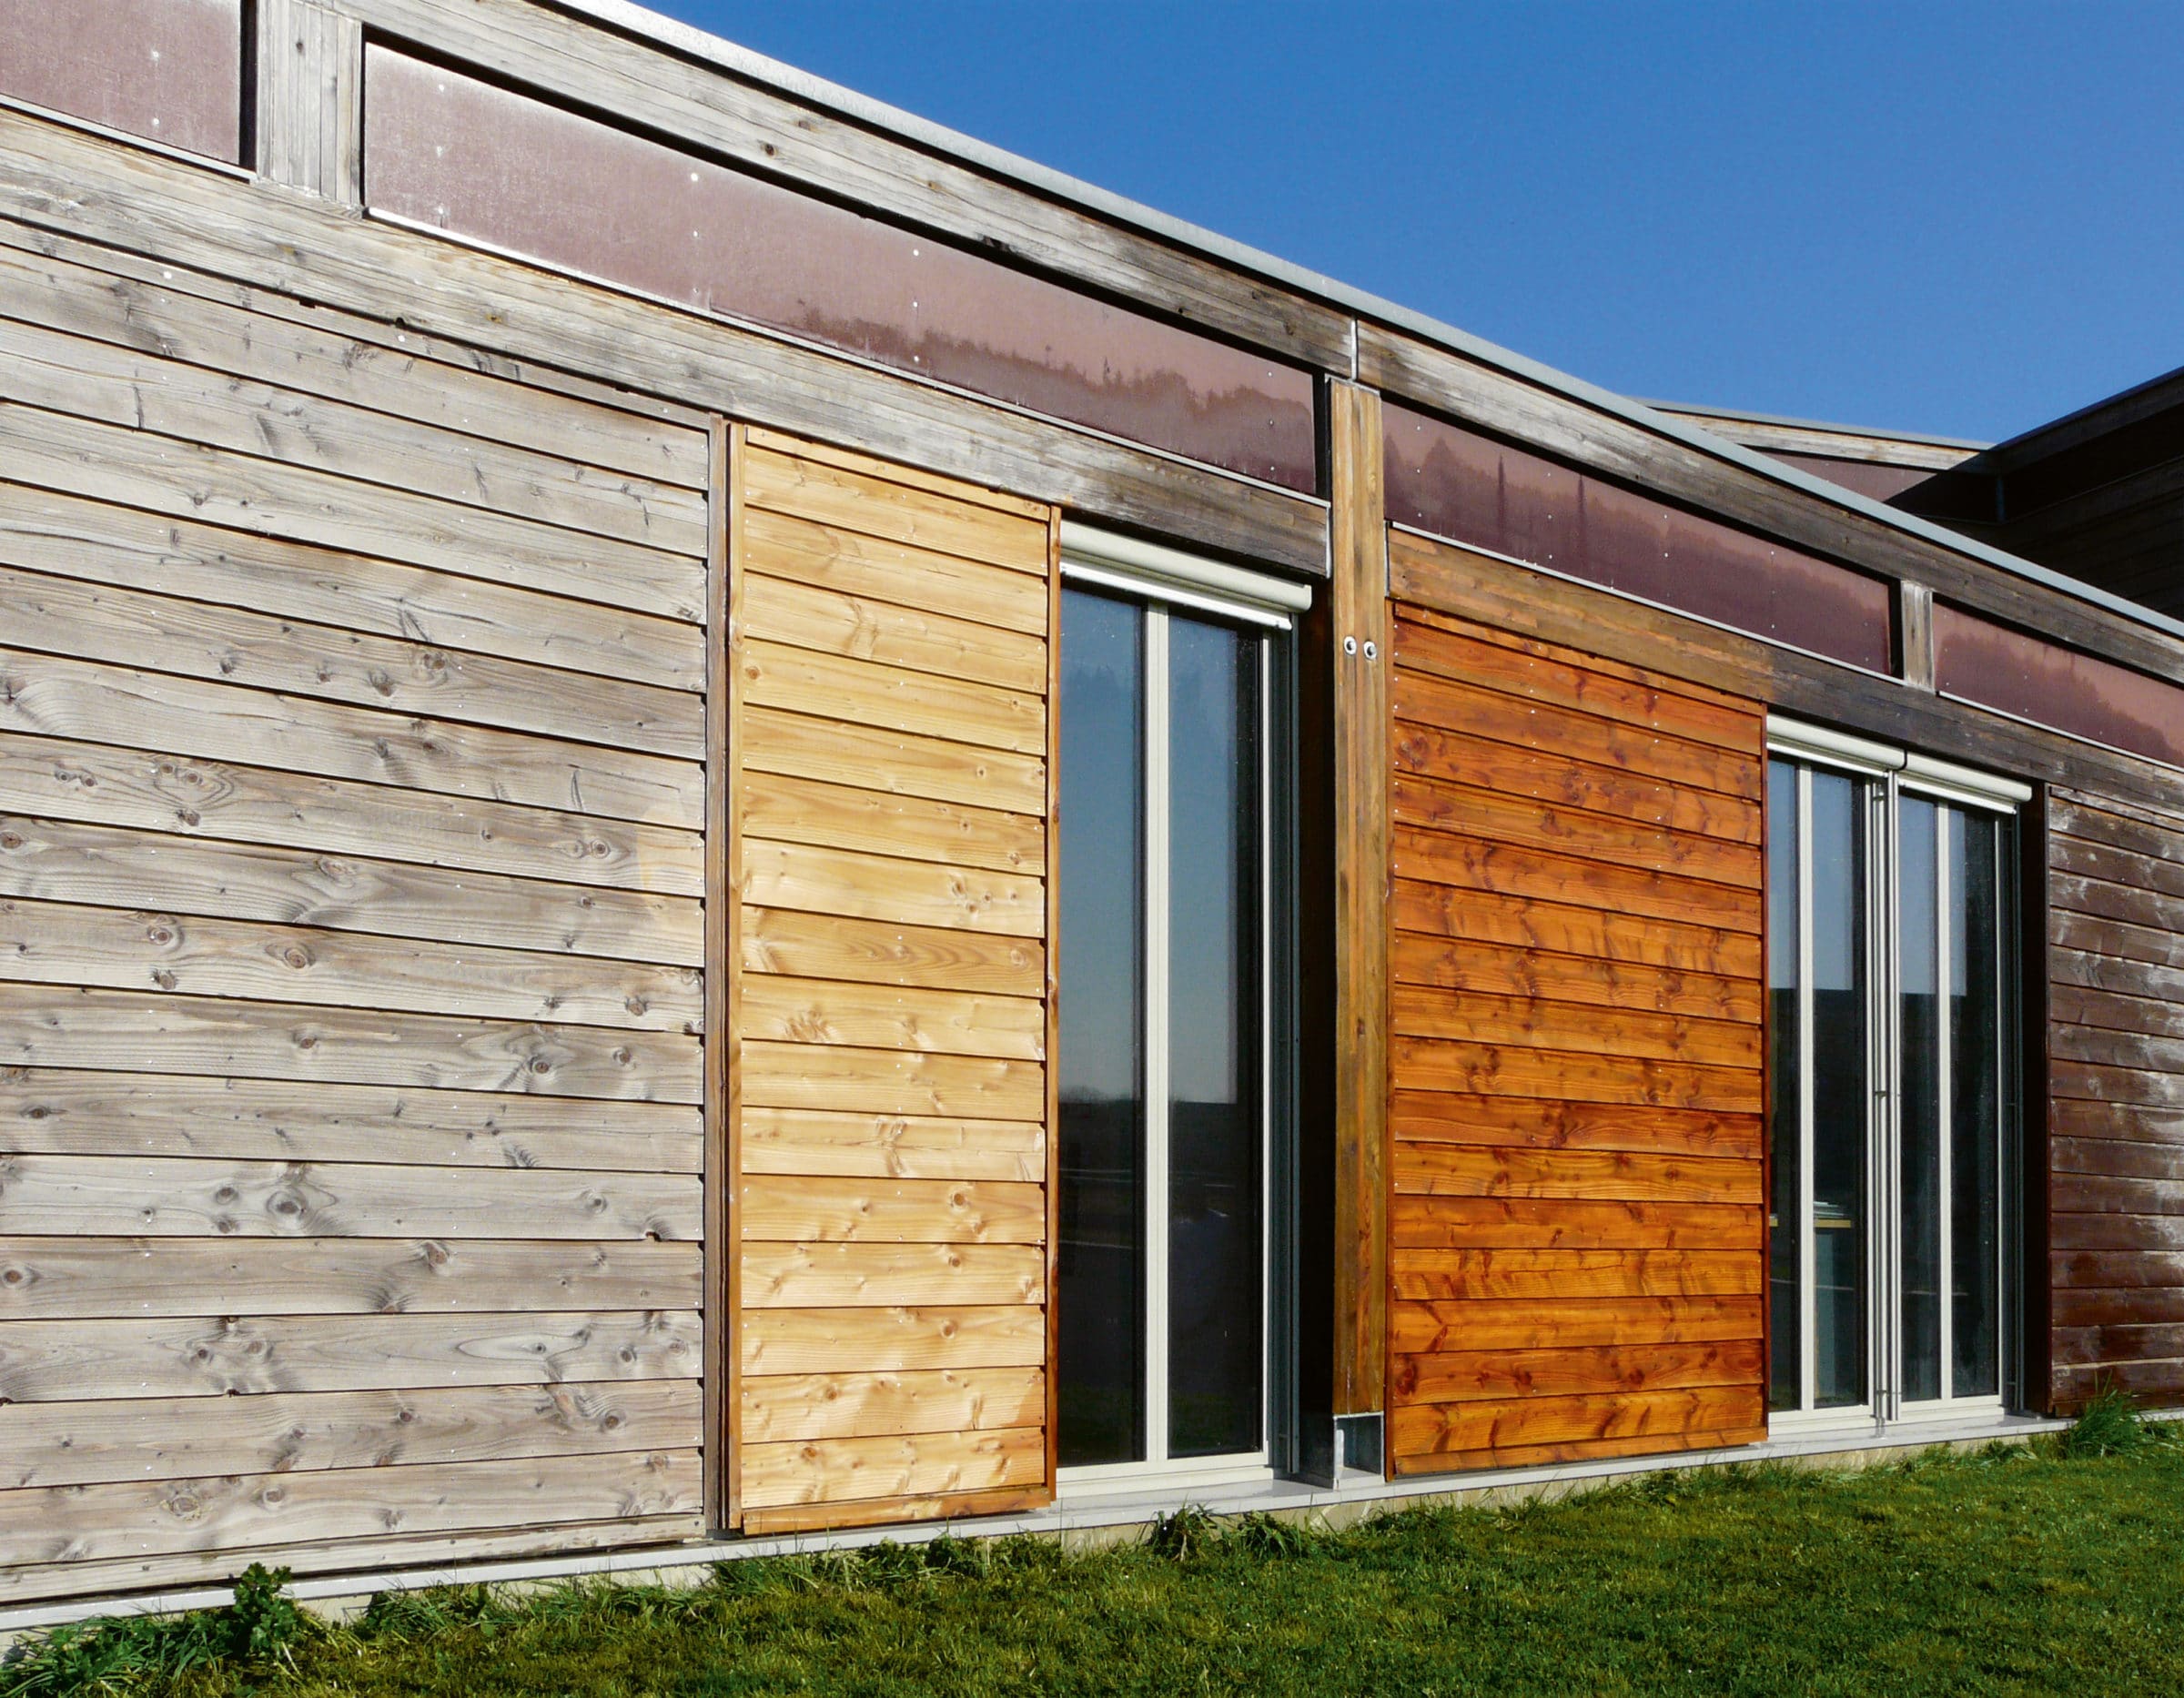 Net-Trol used to revive wooden cladding